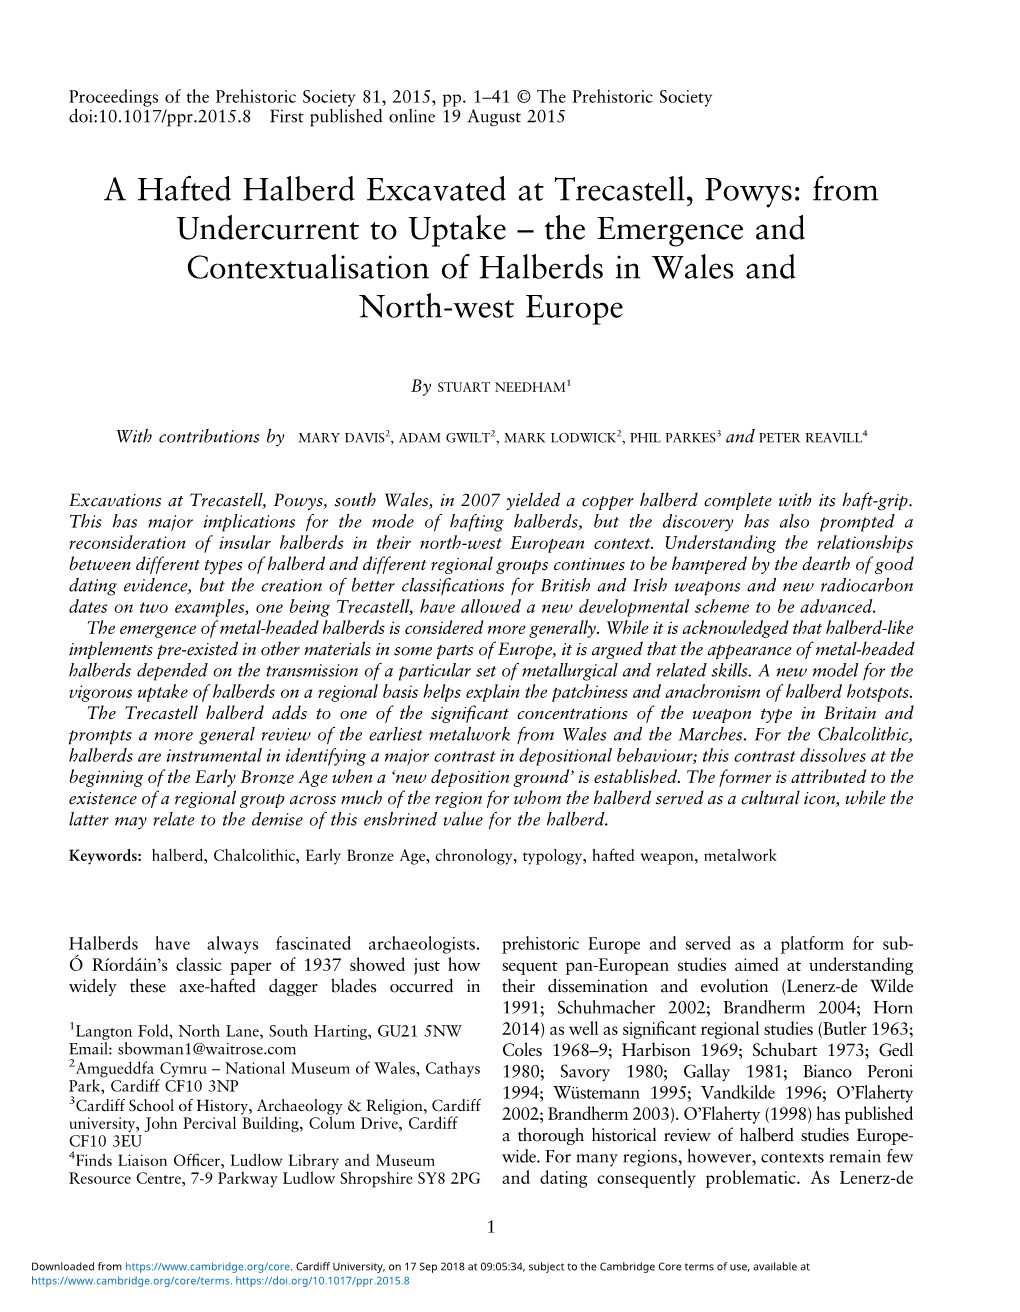 A Hafted Halberd Excavated at Trecastell, Powys: from Undercurrent to Uptake – the Emergence and Contextualisation of Halberds in Wales and North-West Europe